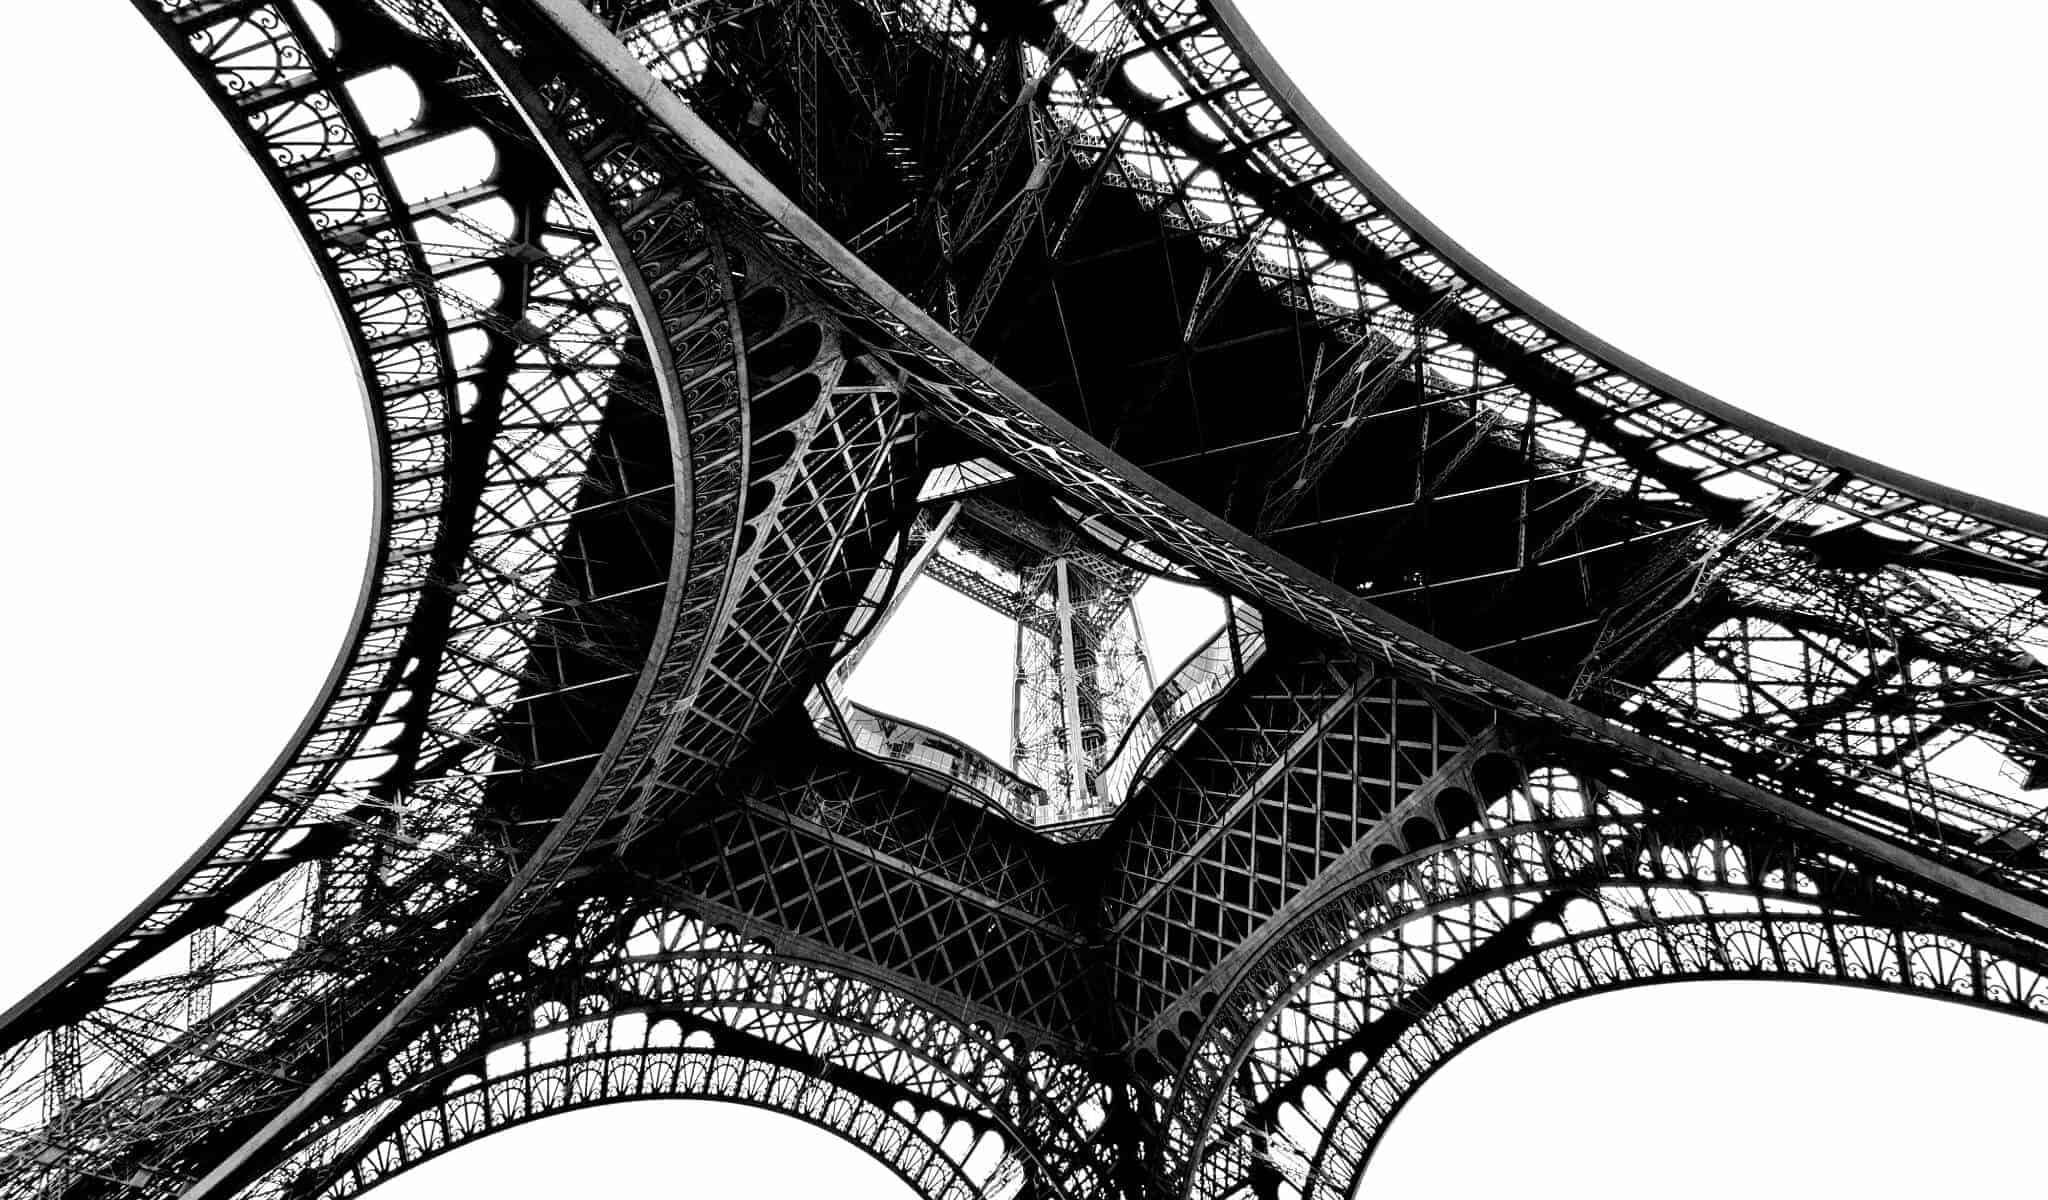 Eiffel Tower iron structure view